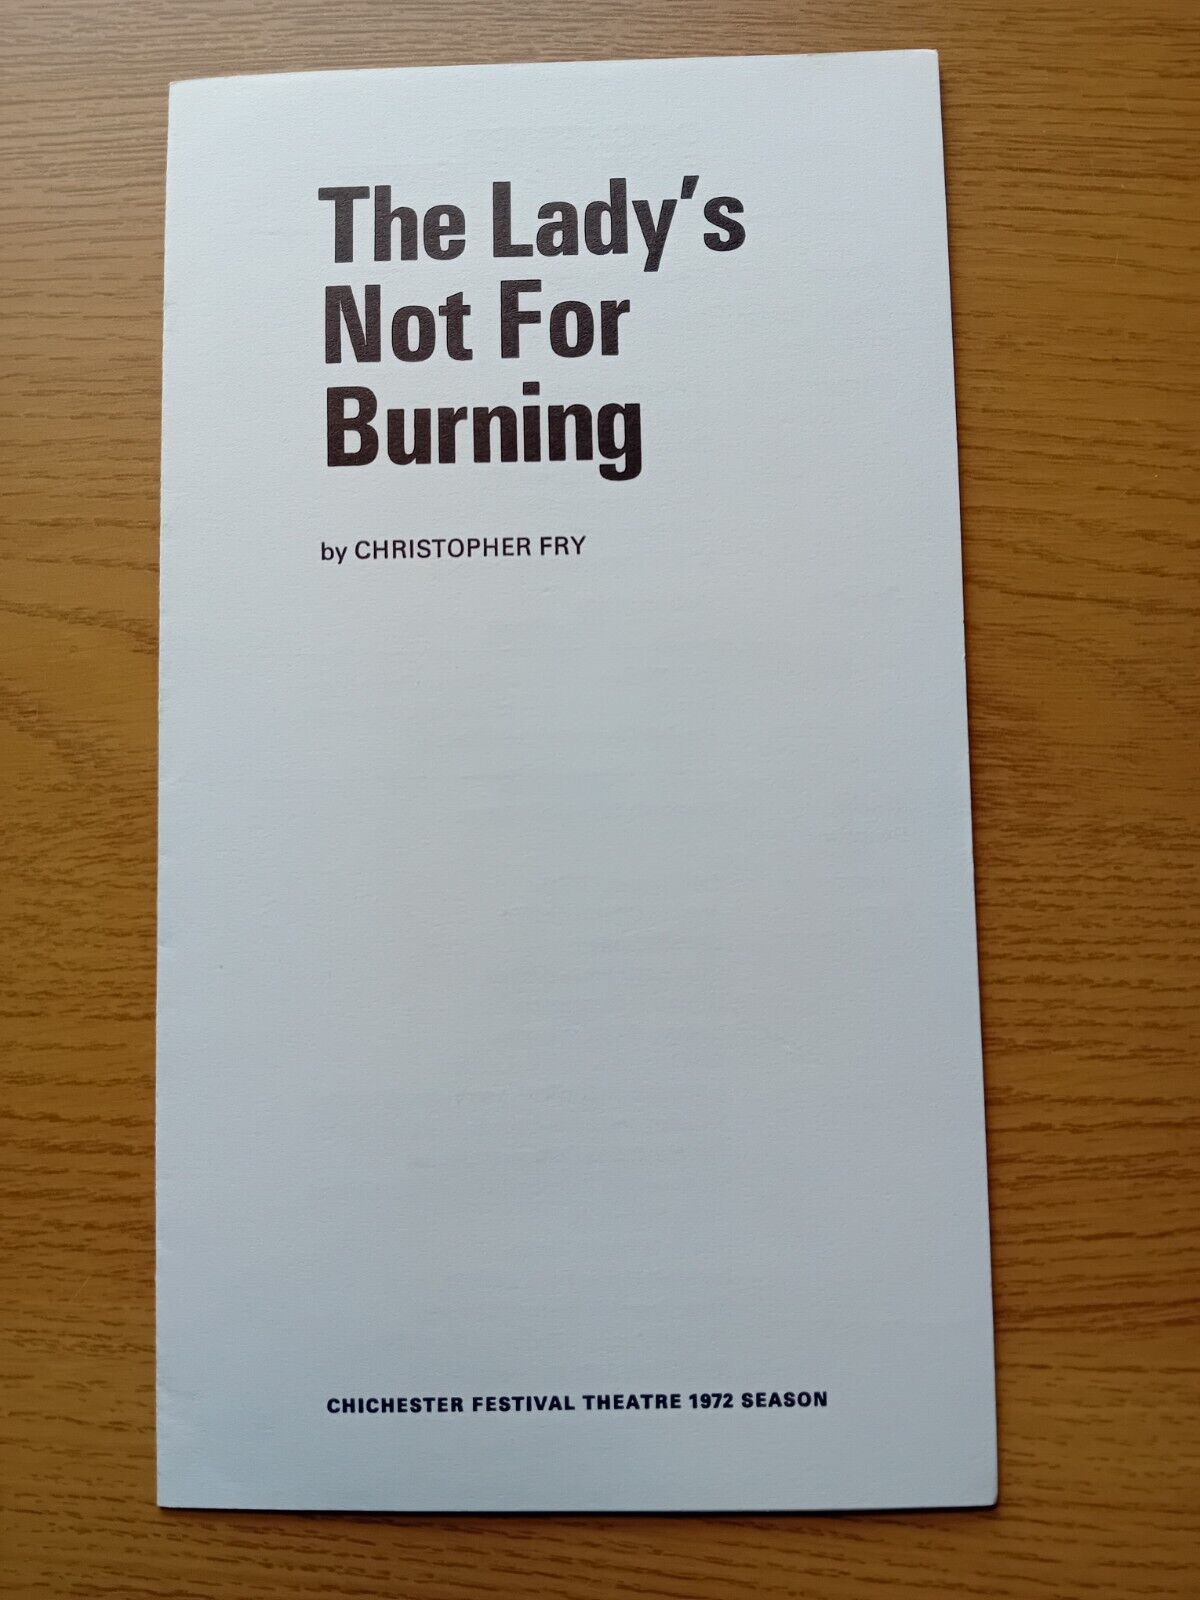 Chichester Festival Theatre. The Ladys Not For Burning. Richard Chamberlain 1972